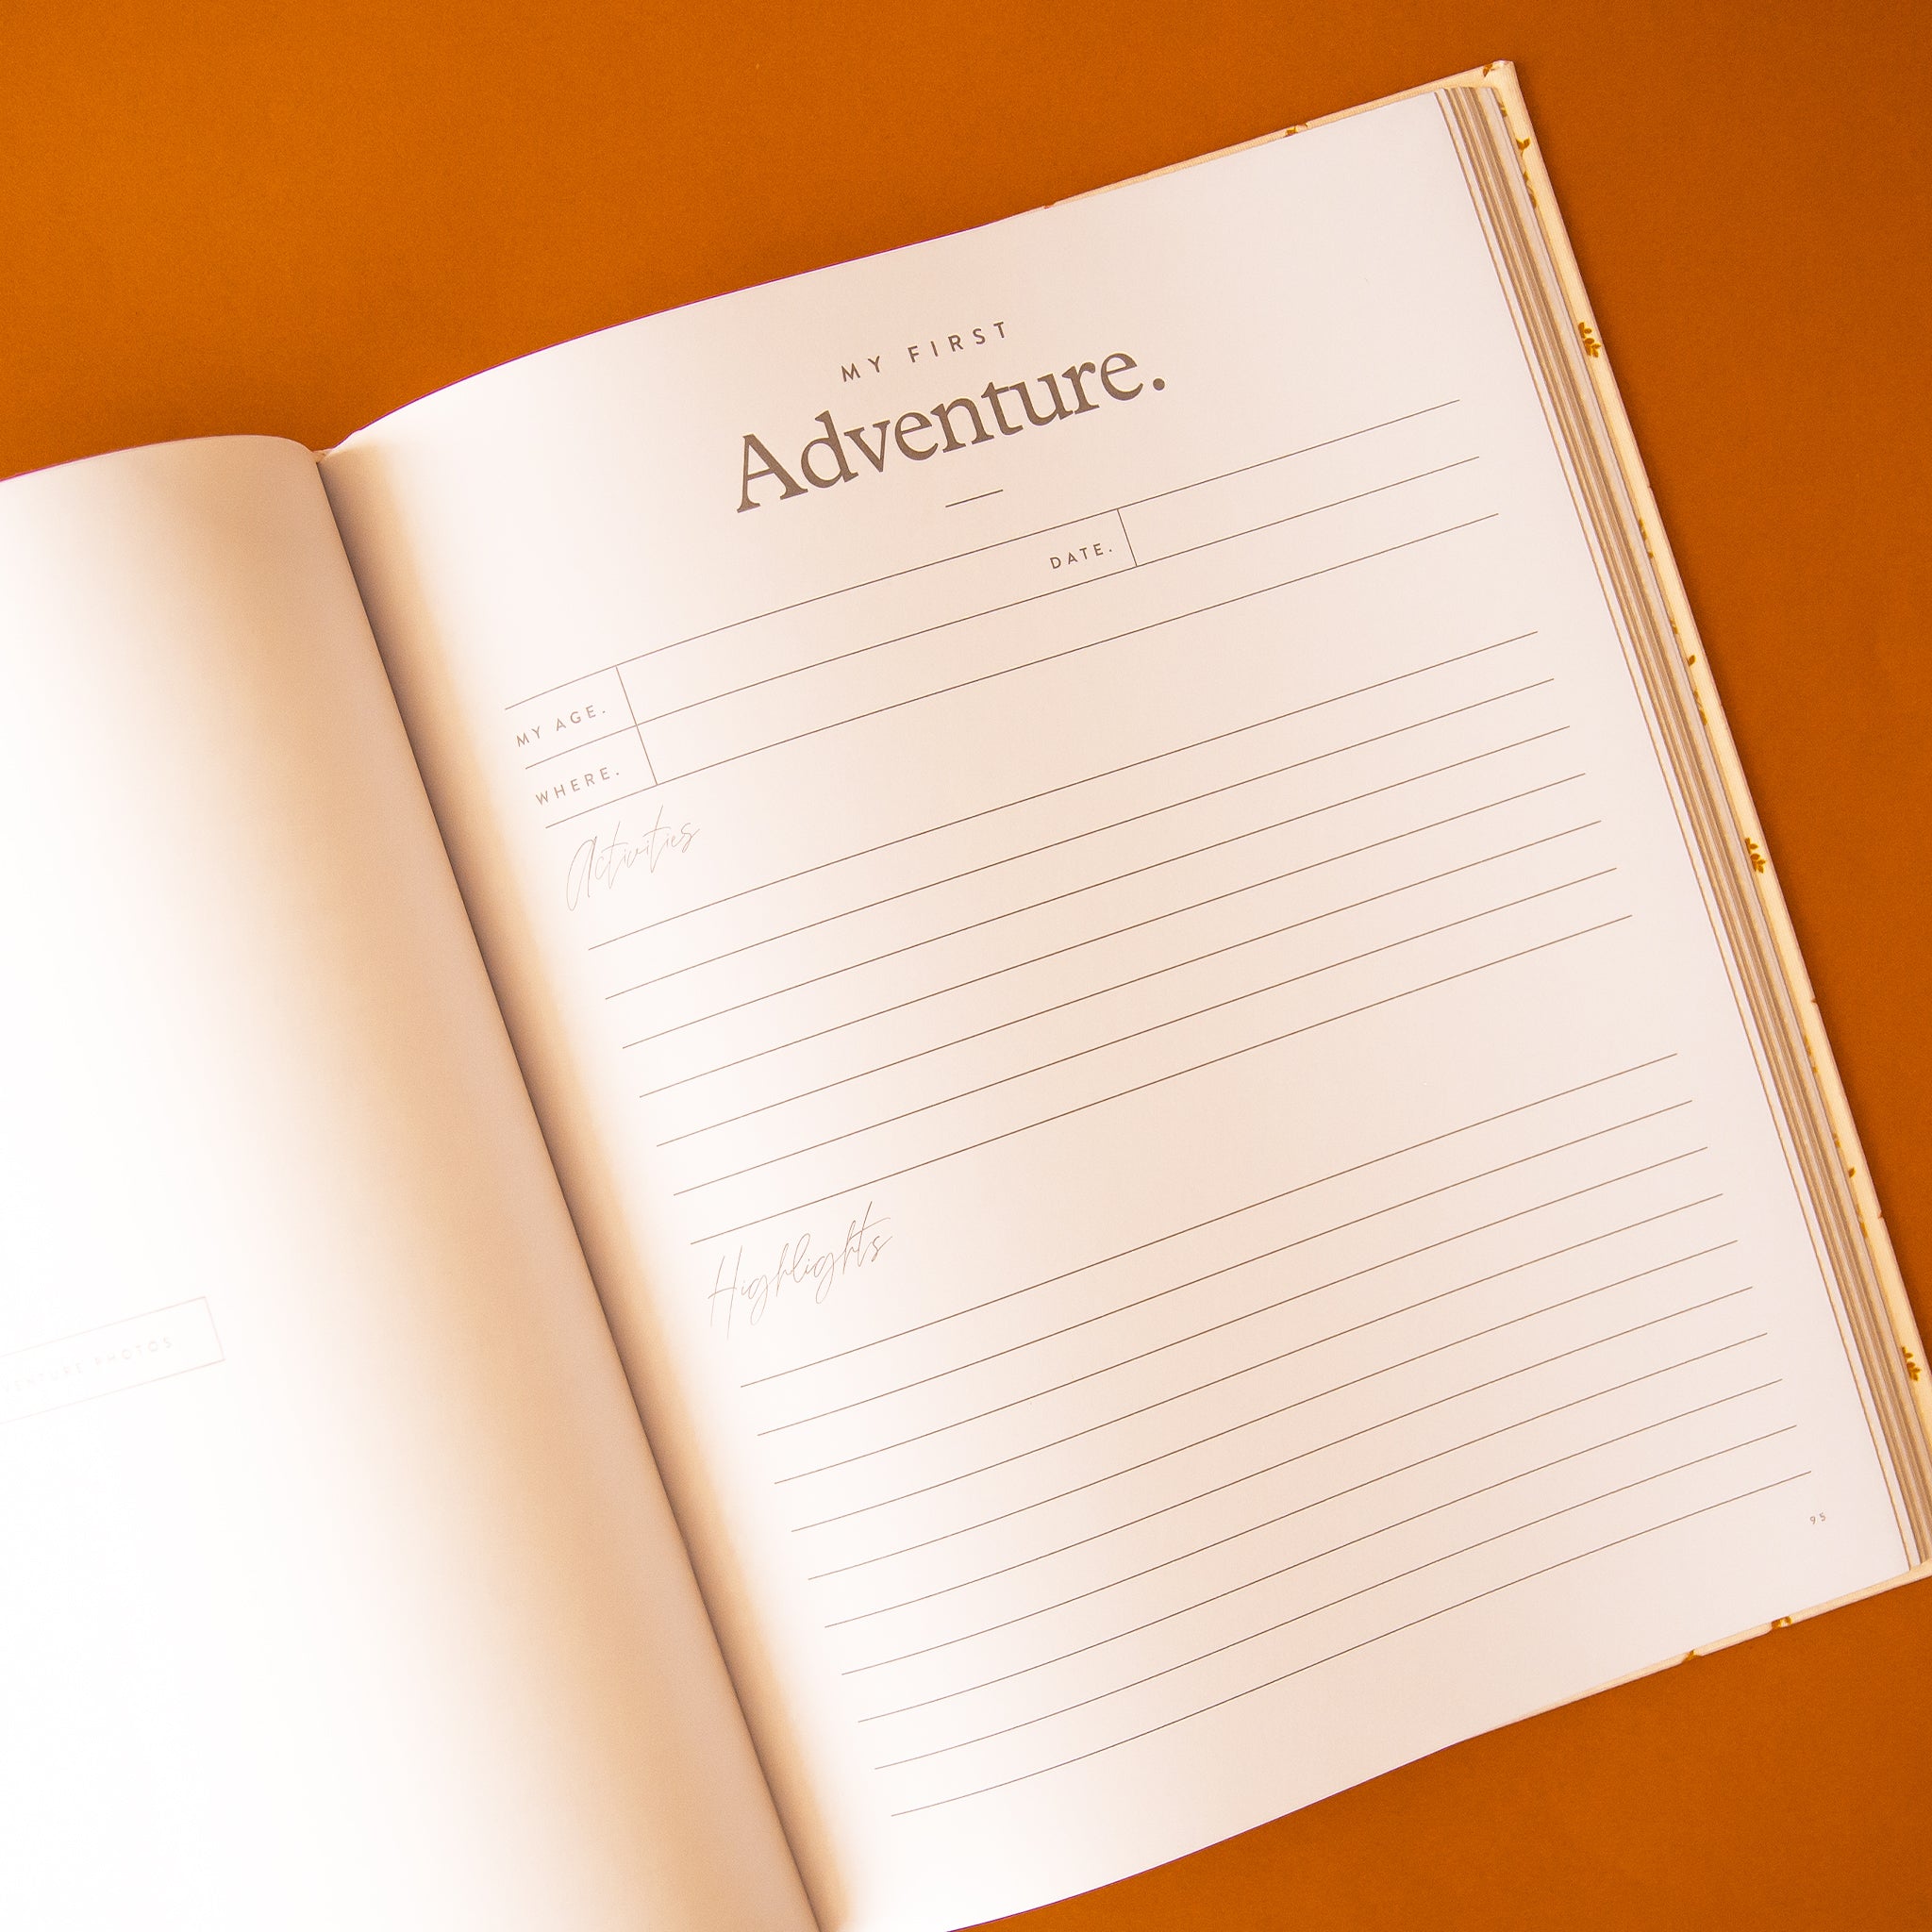 The inside of the book that has prompts for documenting your children's experiences and memories.